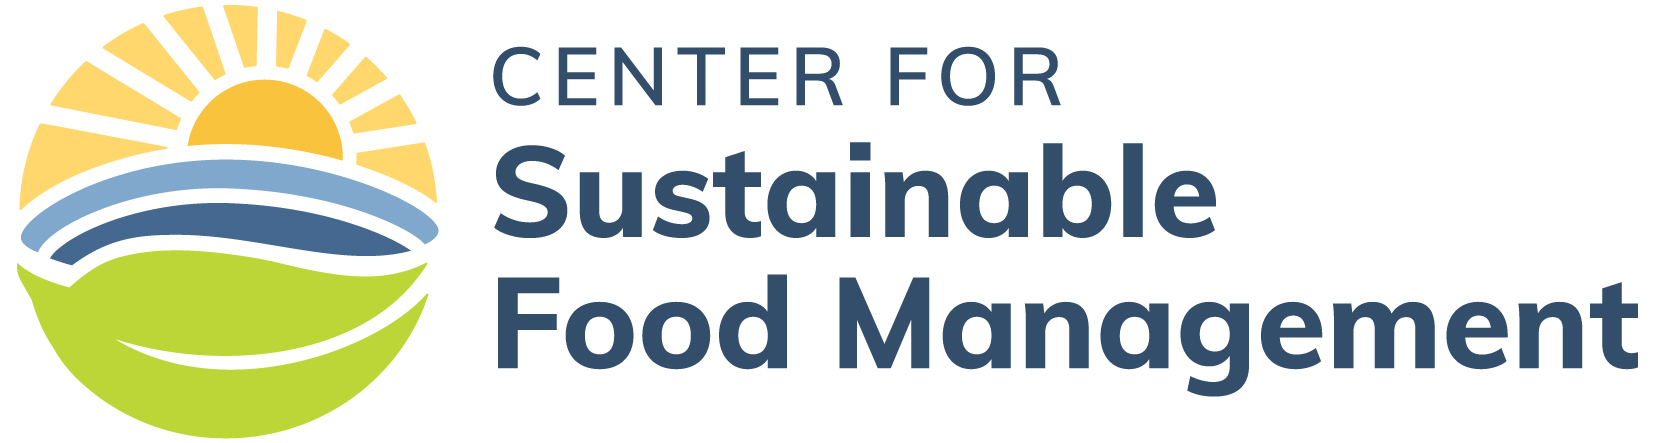 Logo for the Washington Center for Sustainable Food Management